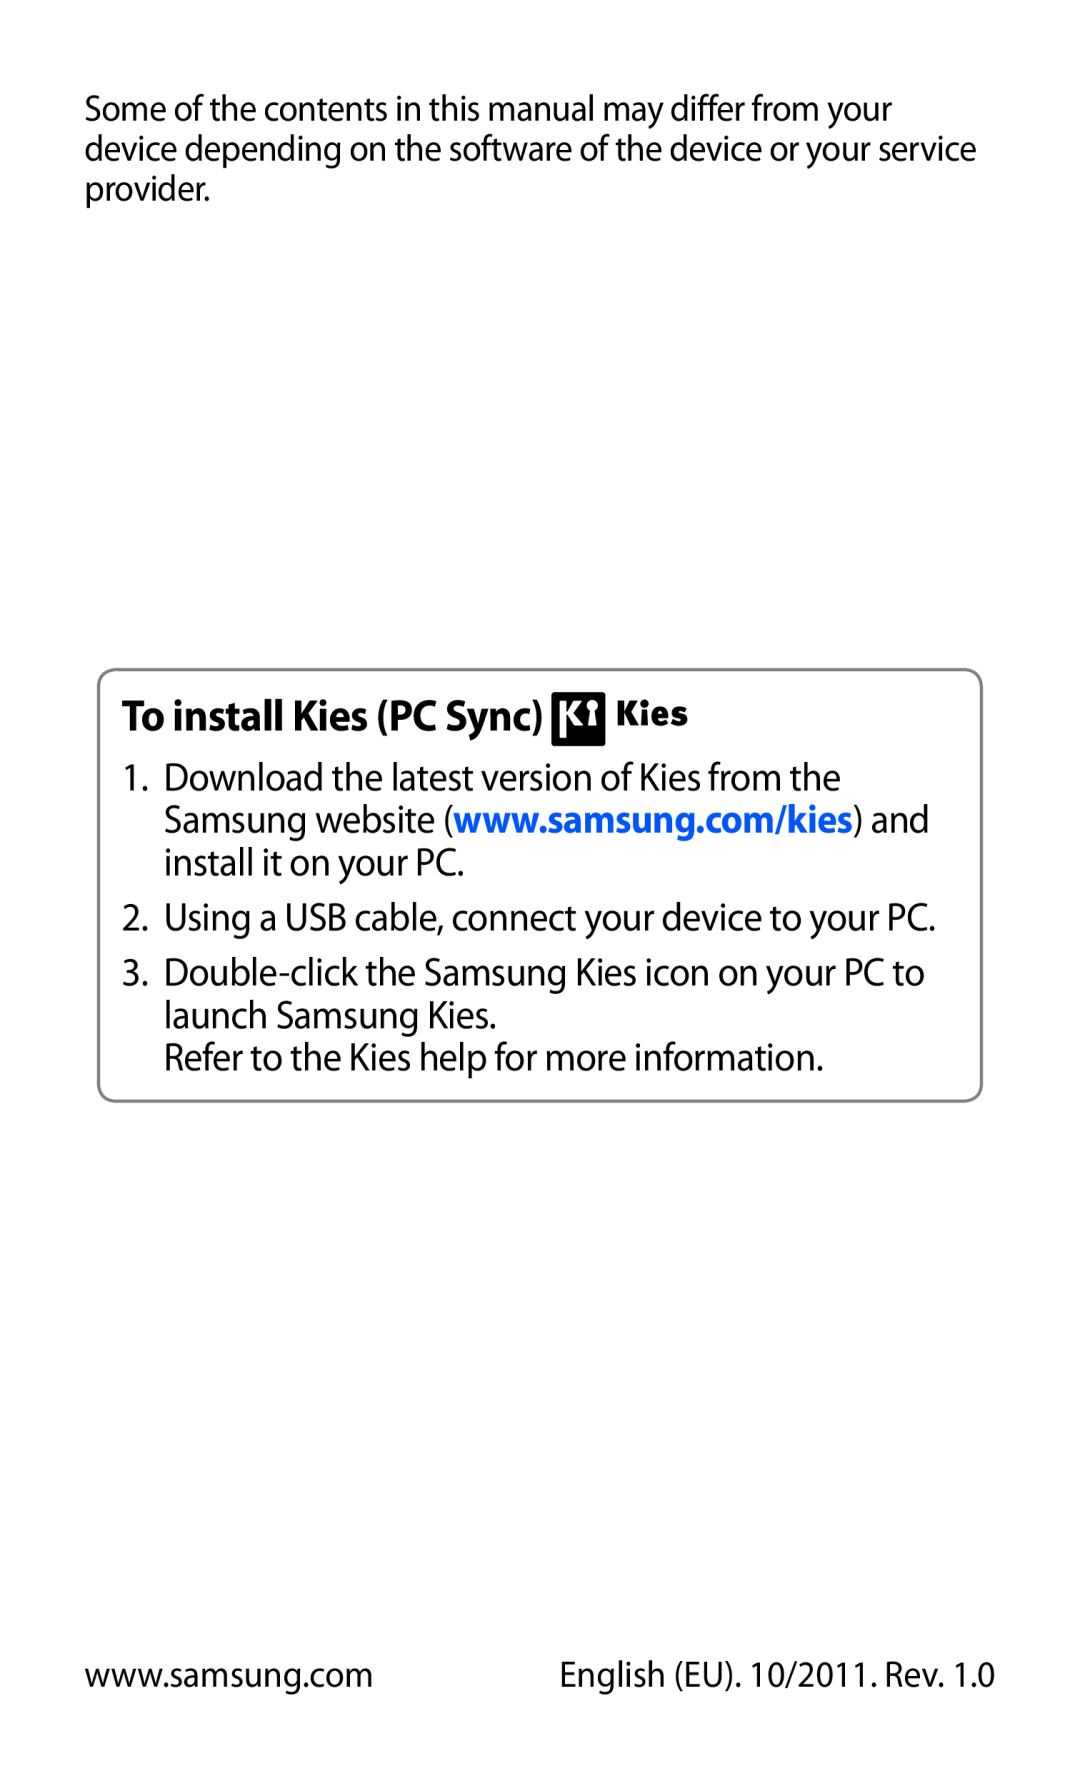 Samsung GT-S5380SSAFOP, GT-S5380SSADBT, GT-S5380WRGDBT To install Kies PC Sync, Refer to the Kies help for more information 